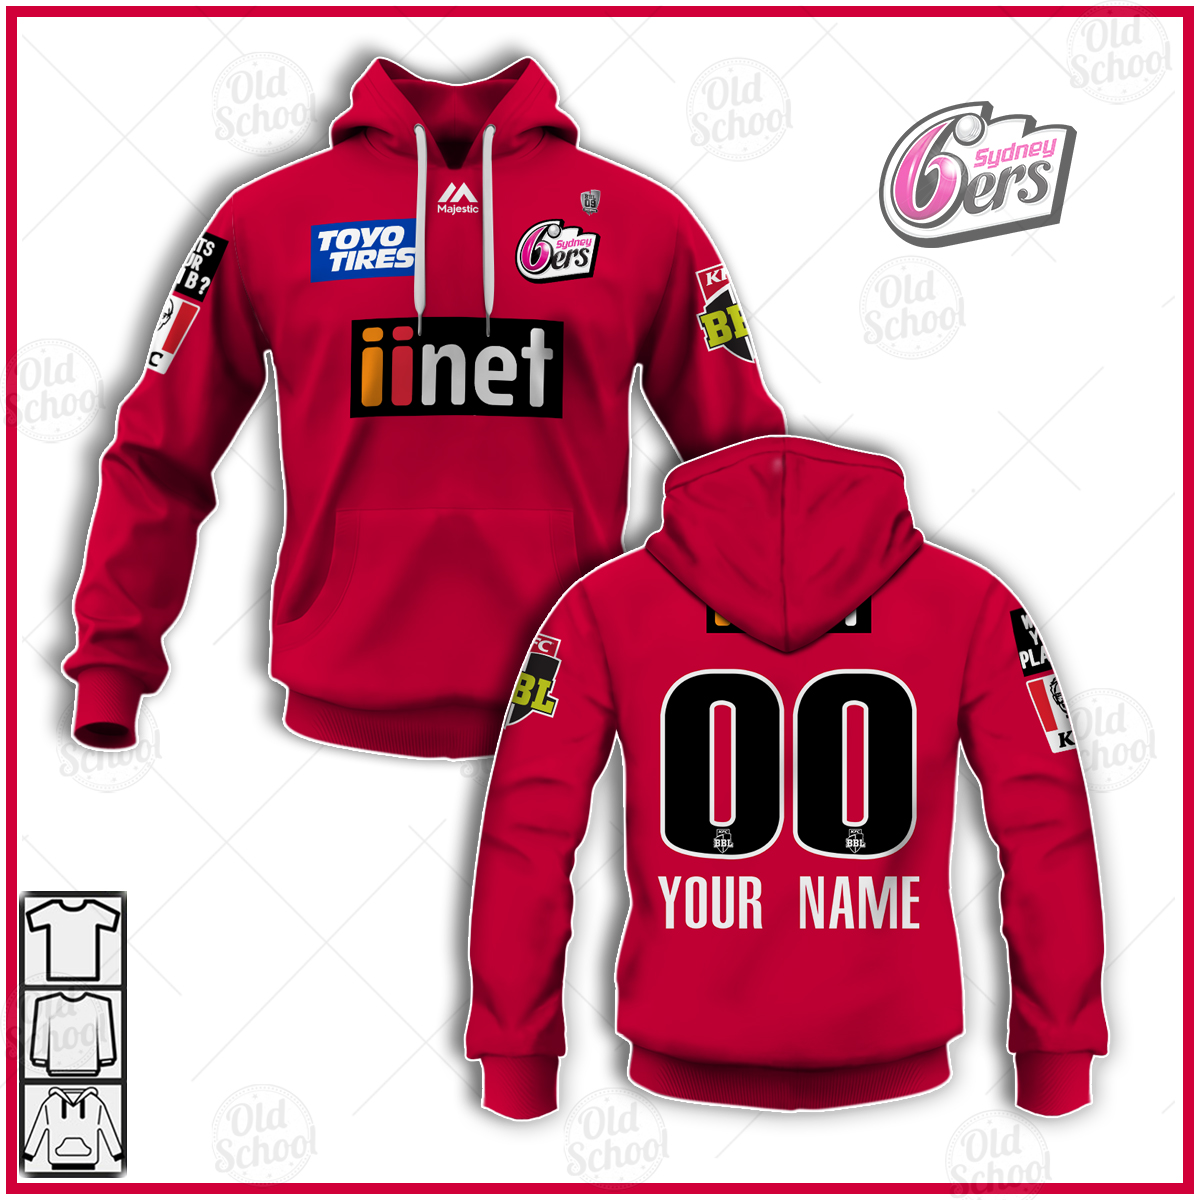 Personalised SYDNEY SIXERS 2020/21 MEN'S BBL REPLICA JERSEY